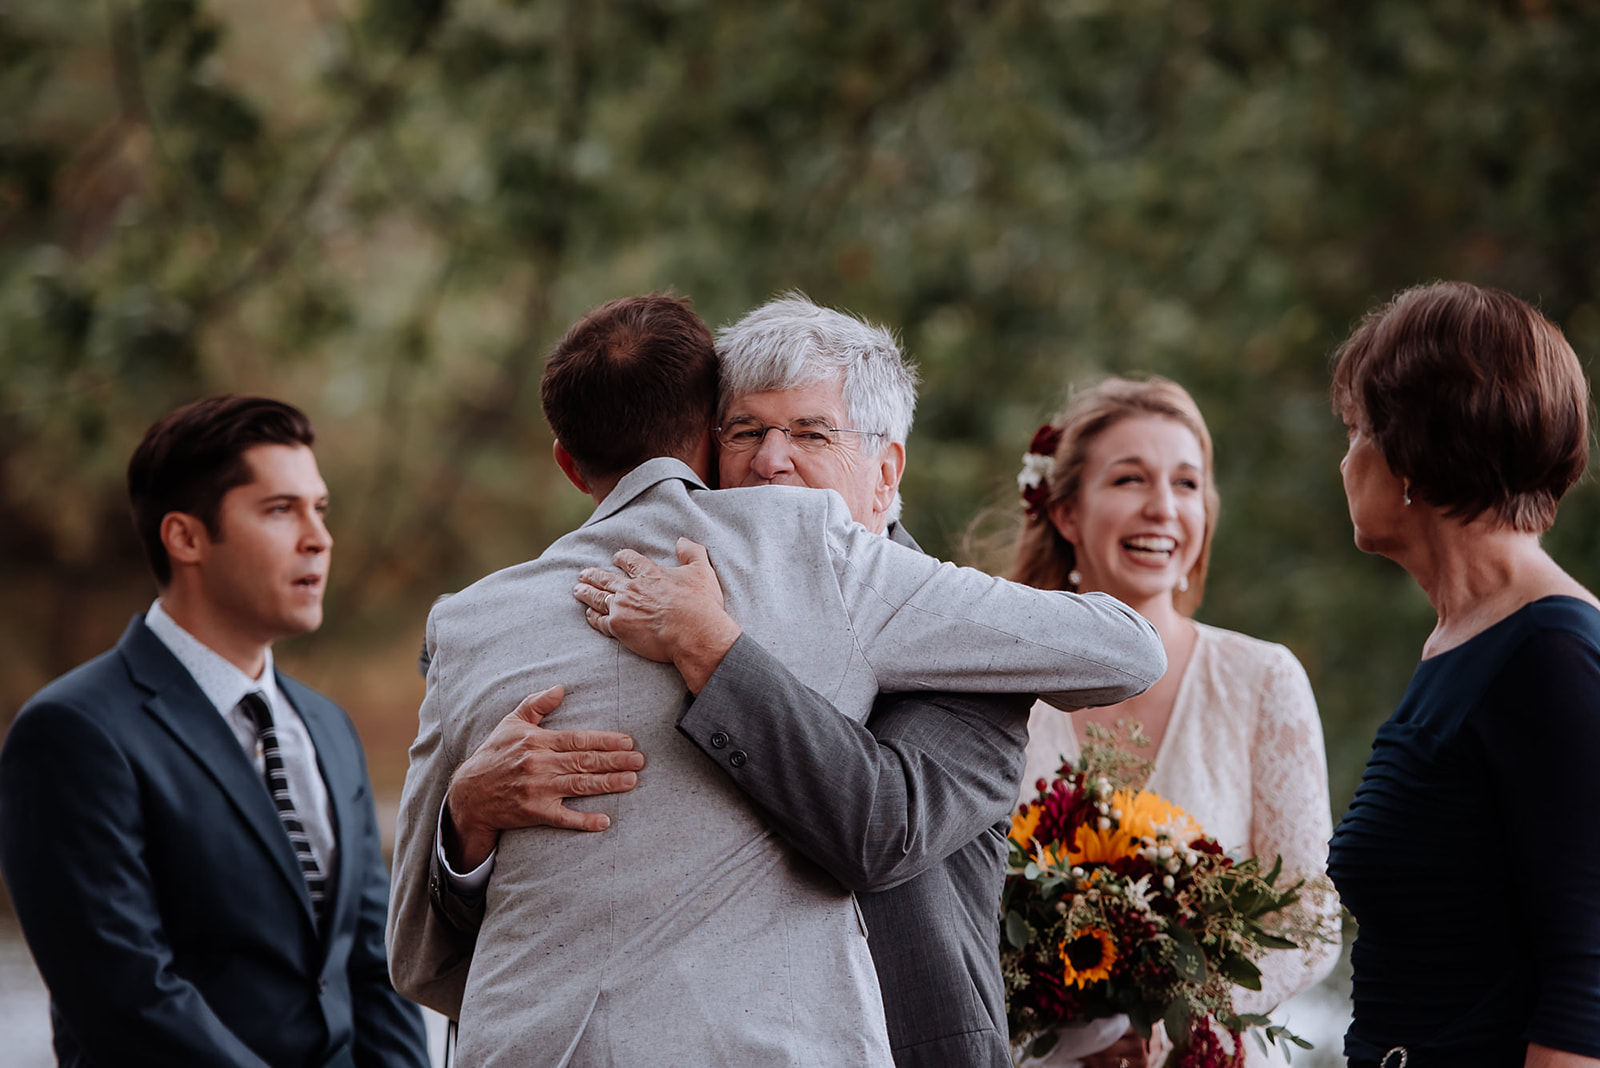 Groom hugs his Bride's Father at the end of the aisle to start their ceremony.